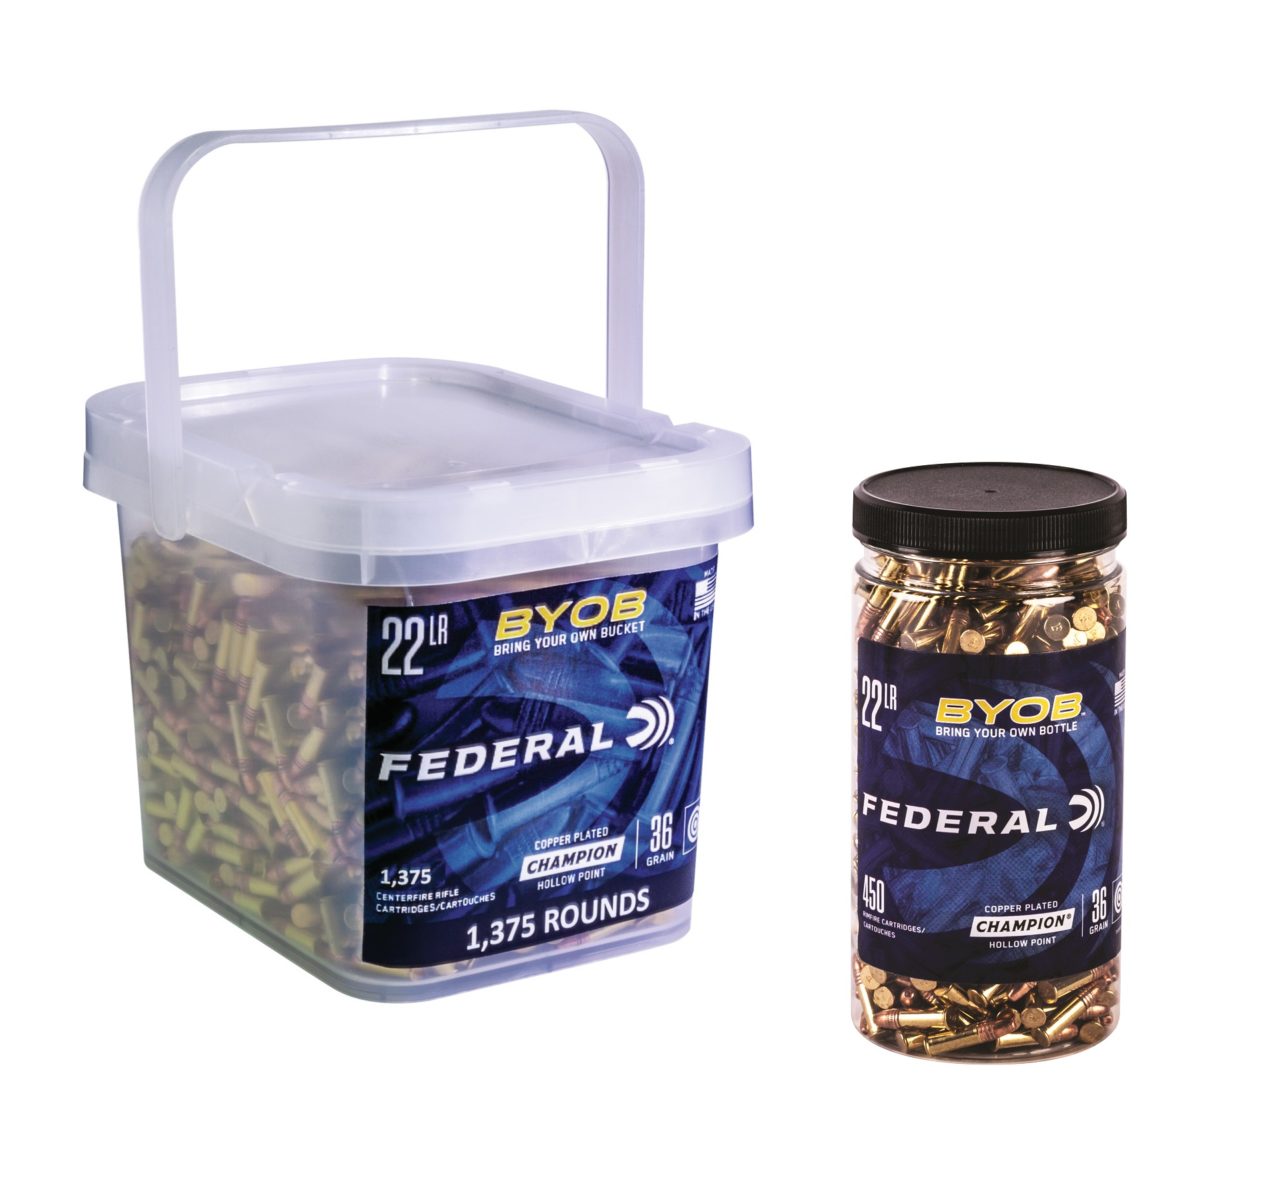 Federal BYOB Buckets and Bottles Make a Party Out of Rimfire Range Time